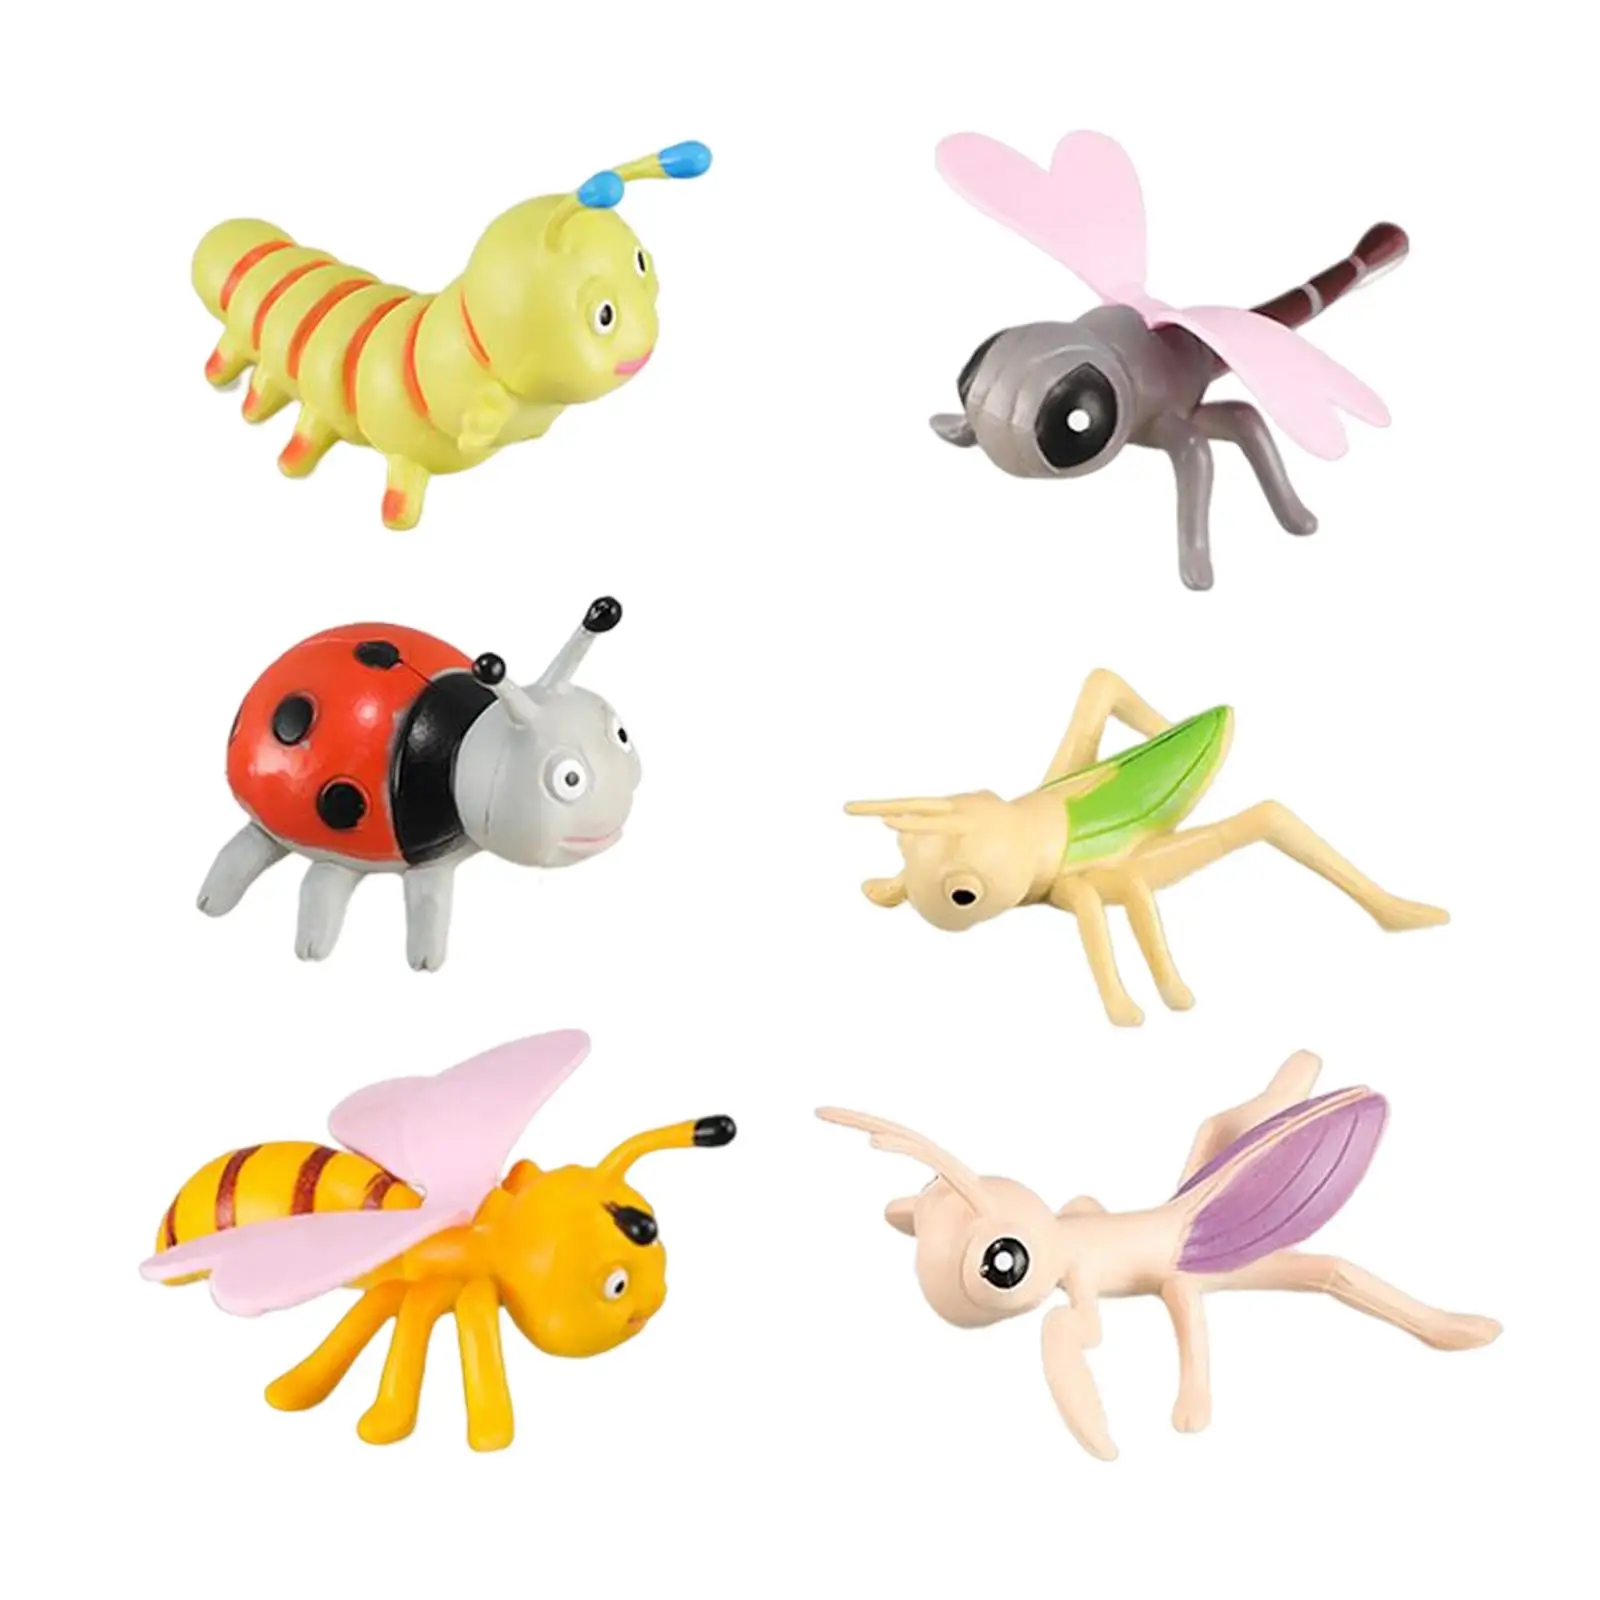 6 Pieces Artifical Animal Model Toy for Toddler Realistic Figures Birthday Gift Party Favors Tabletop Decors Simulation Durable